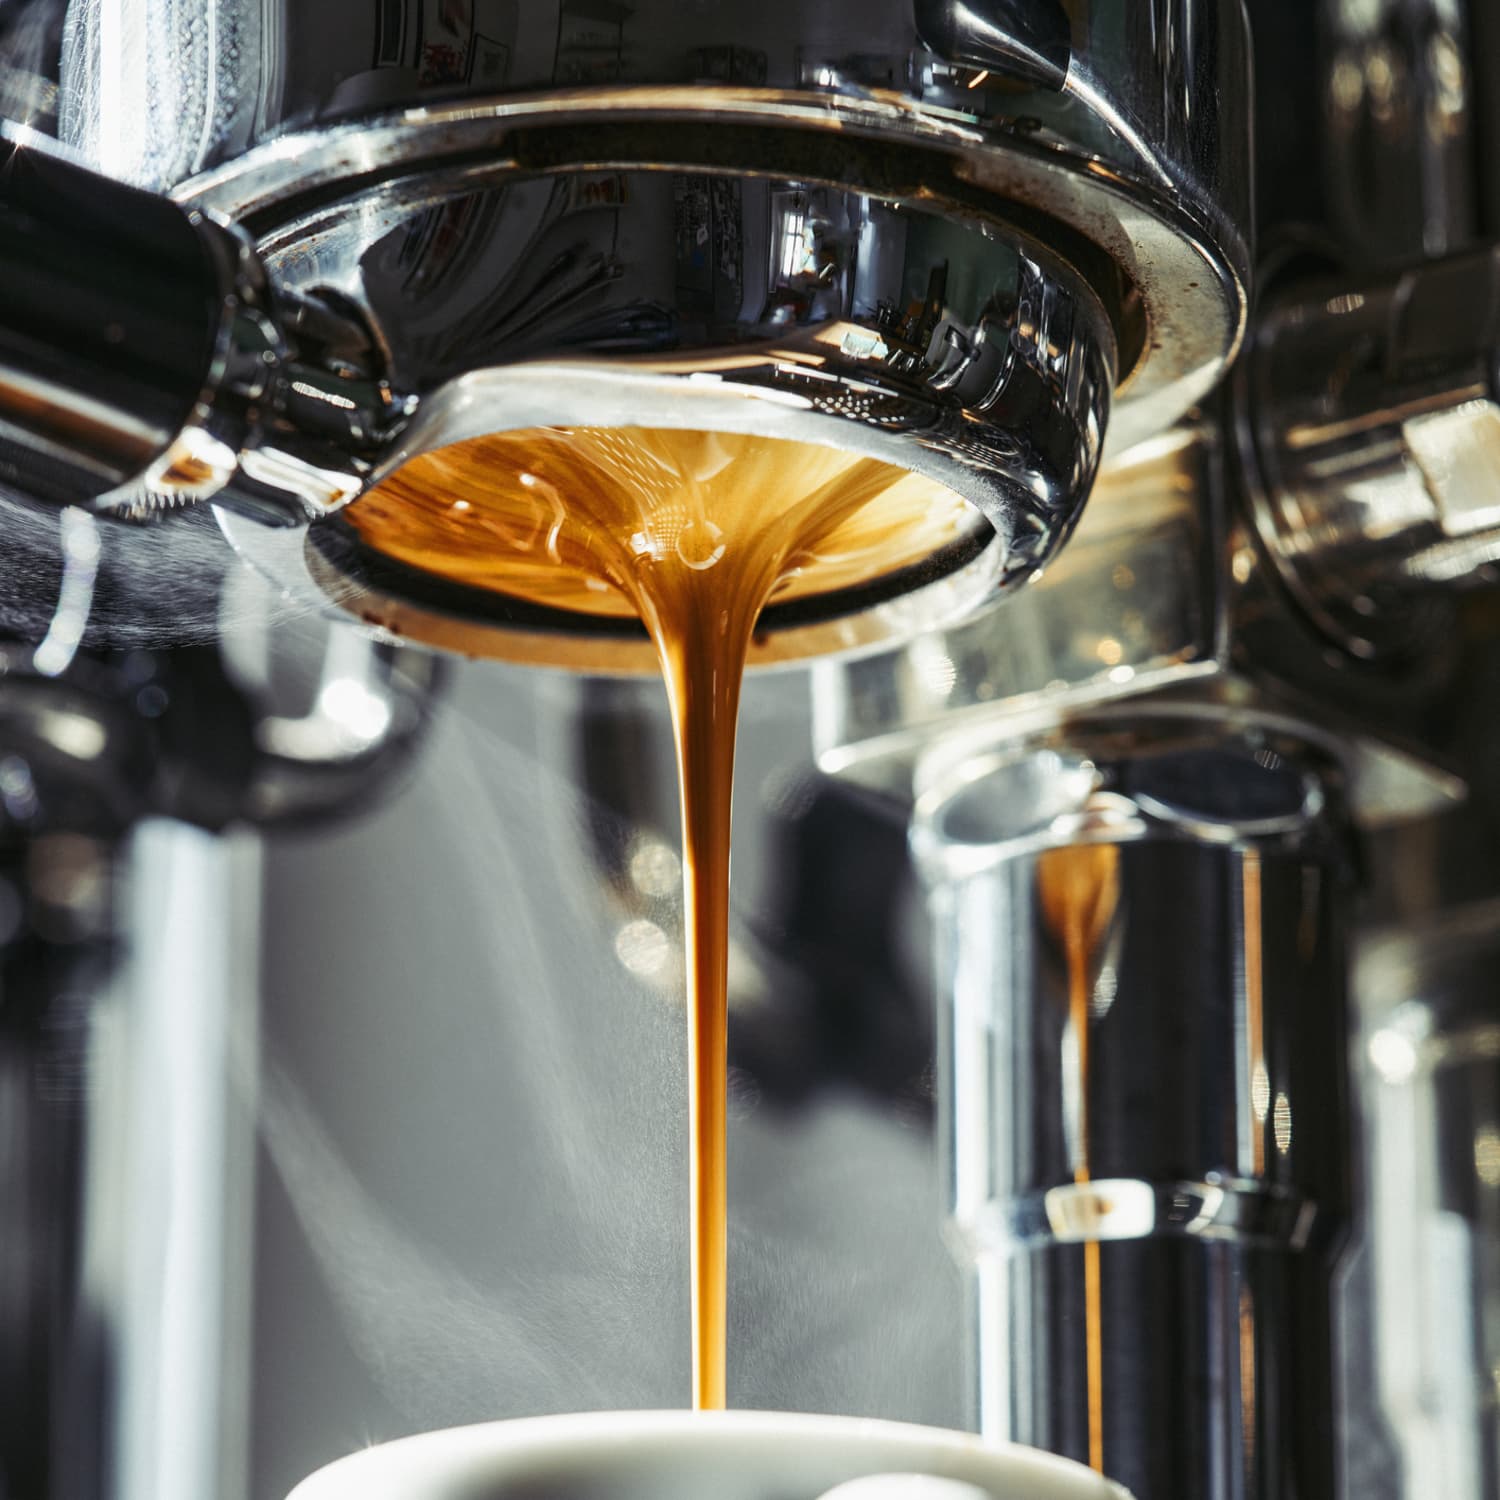 What Is Espresso? And How Is It Different from Coffee?